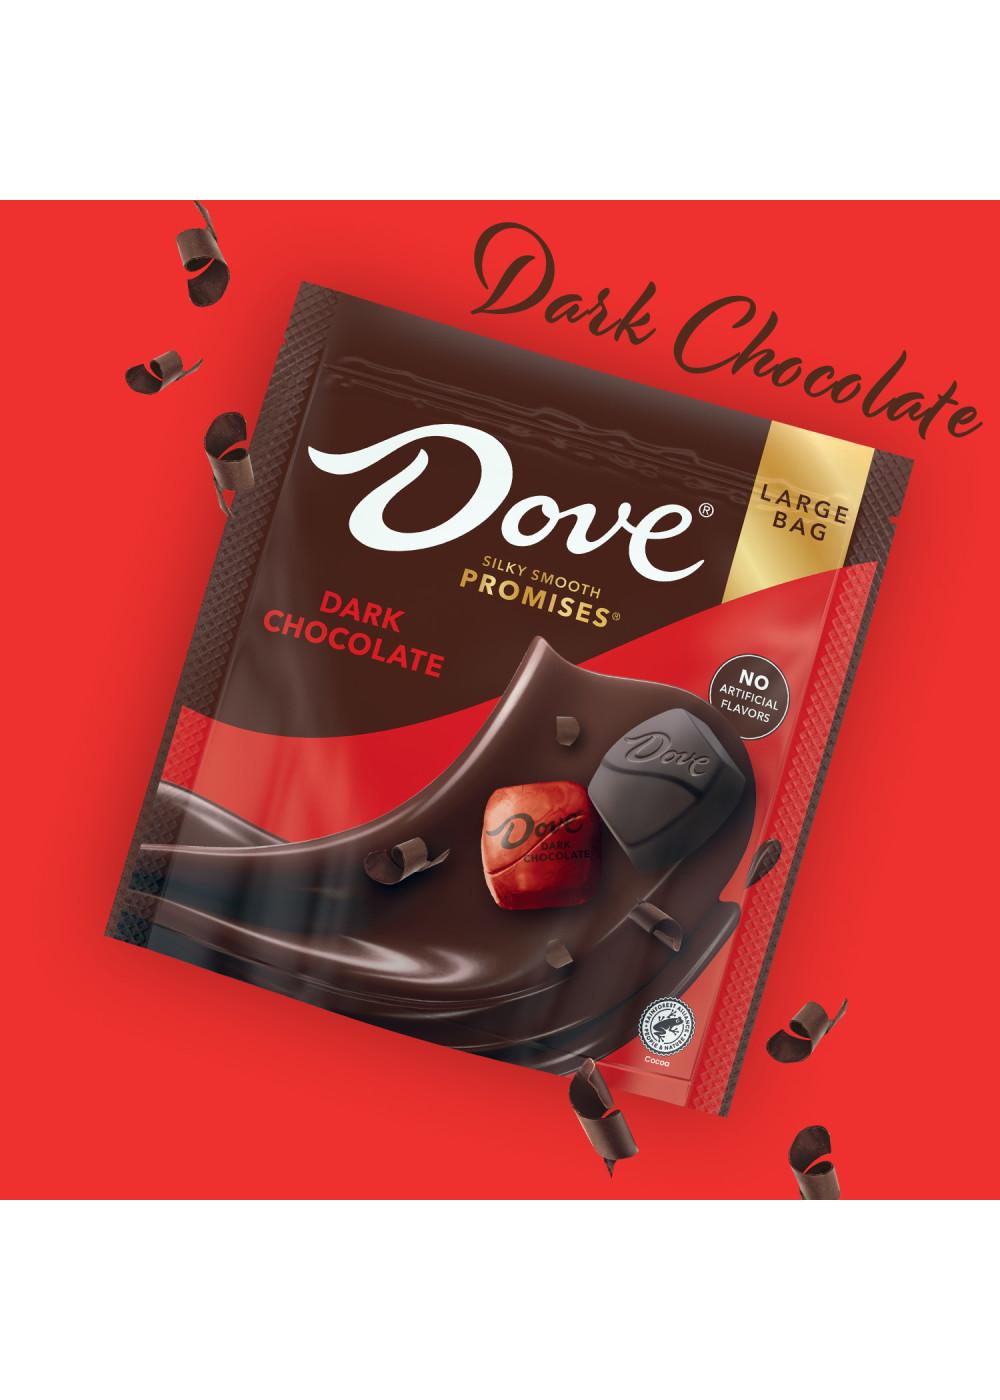 Dove Promises Dark Chocolate Candy - Large Bag; image 6 of 7